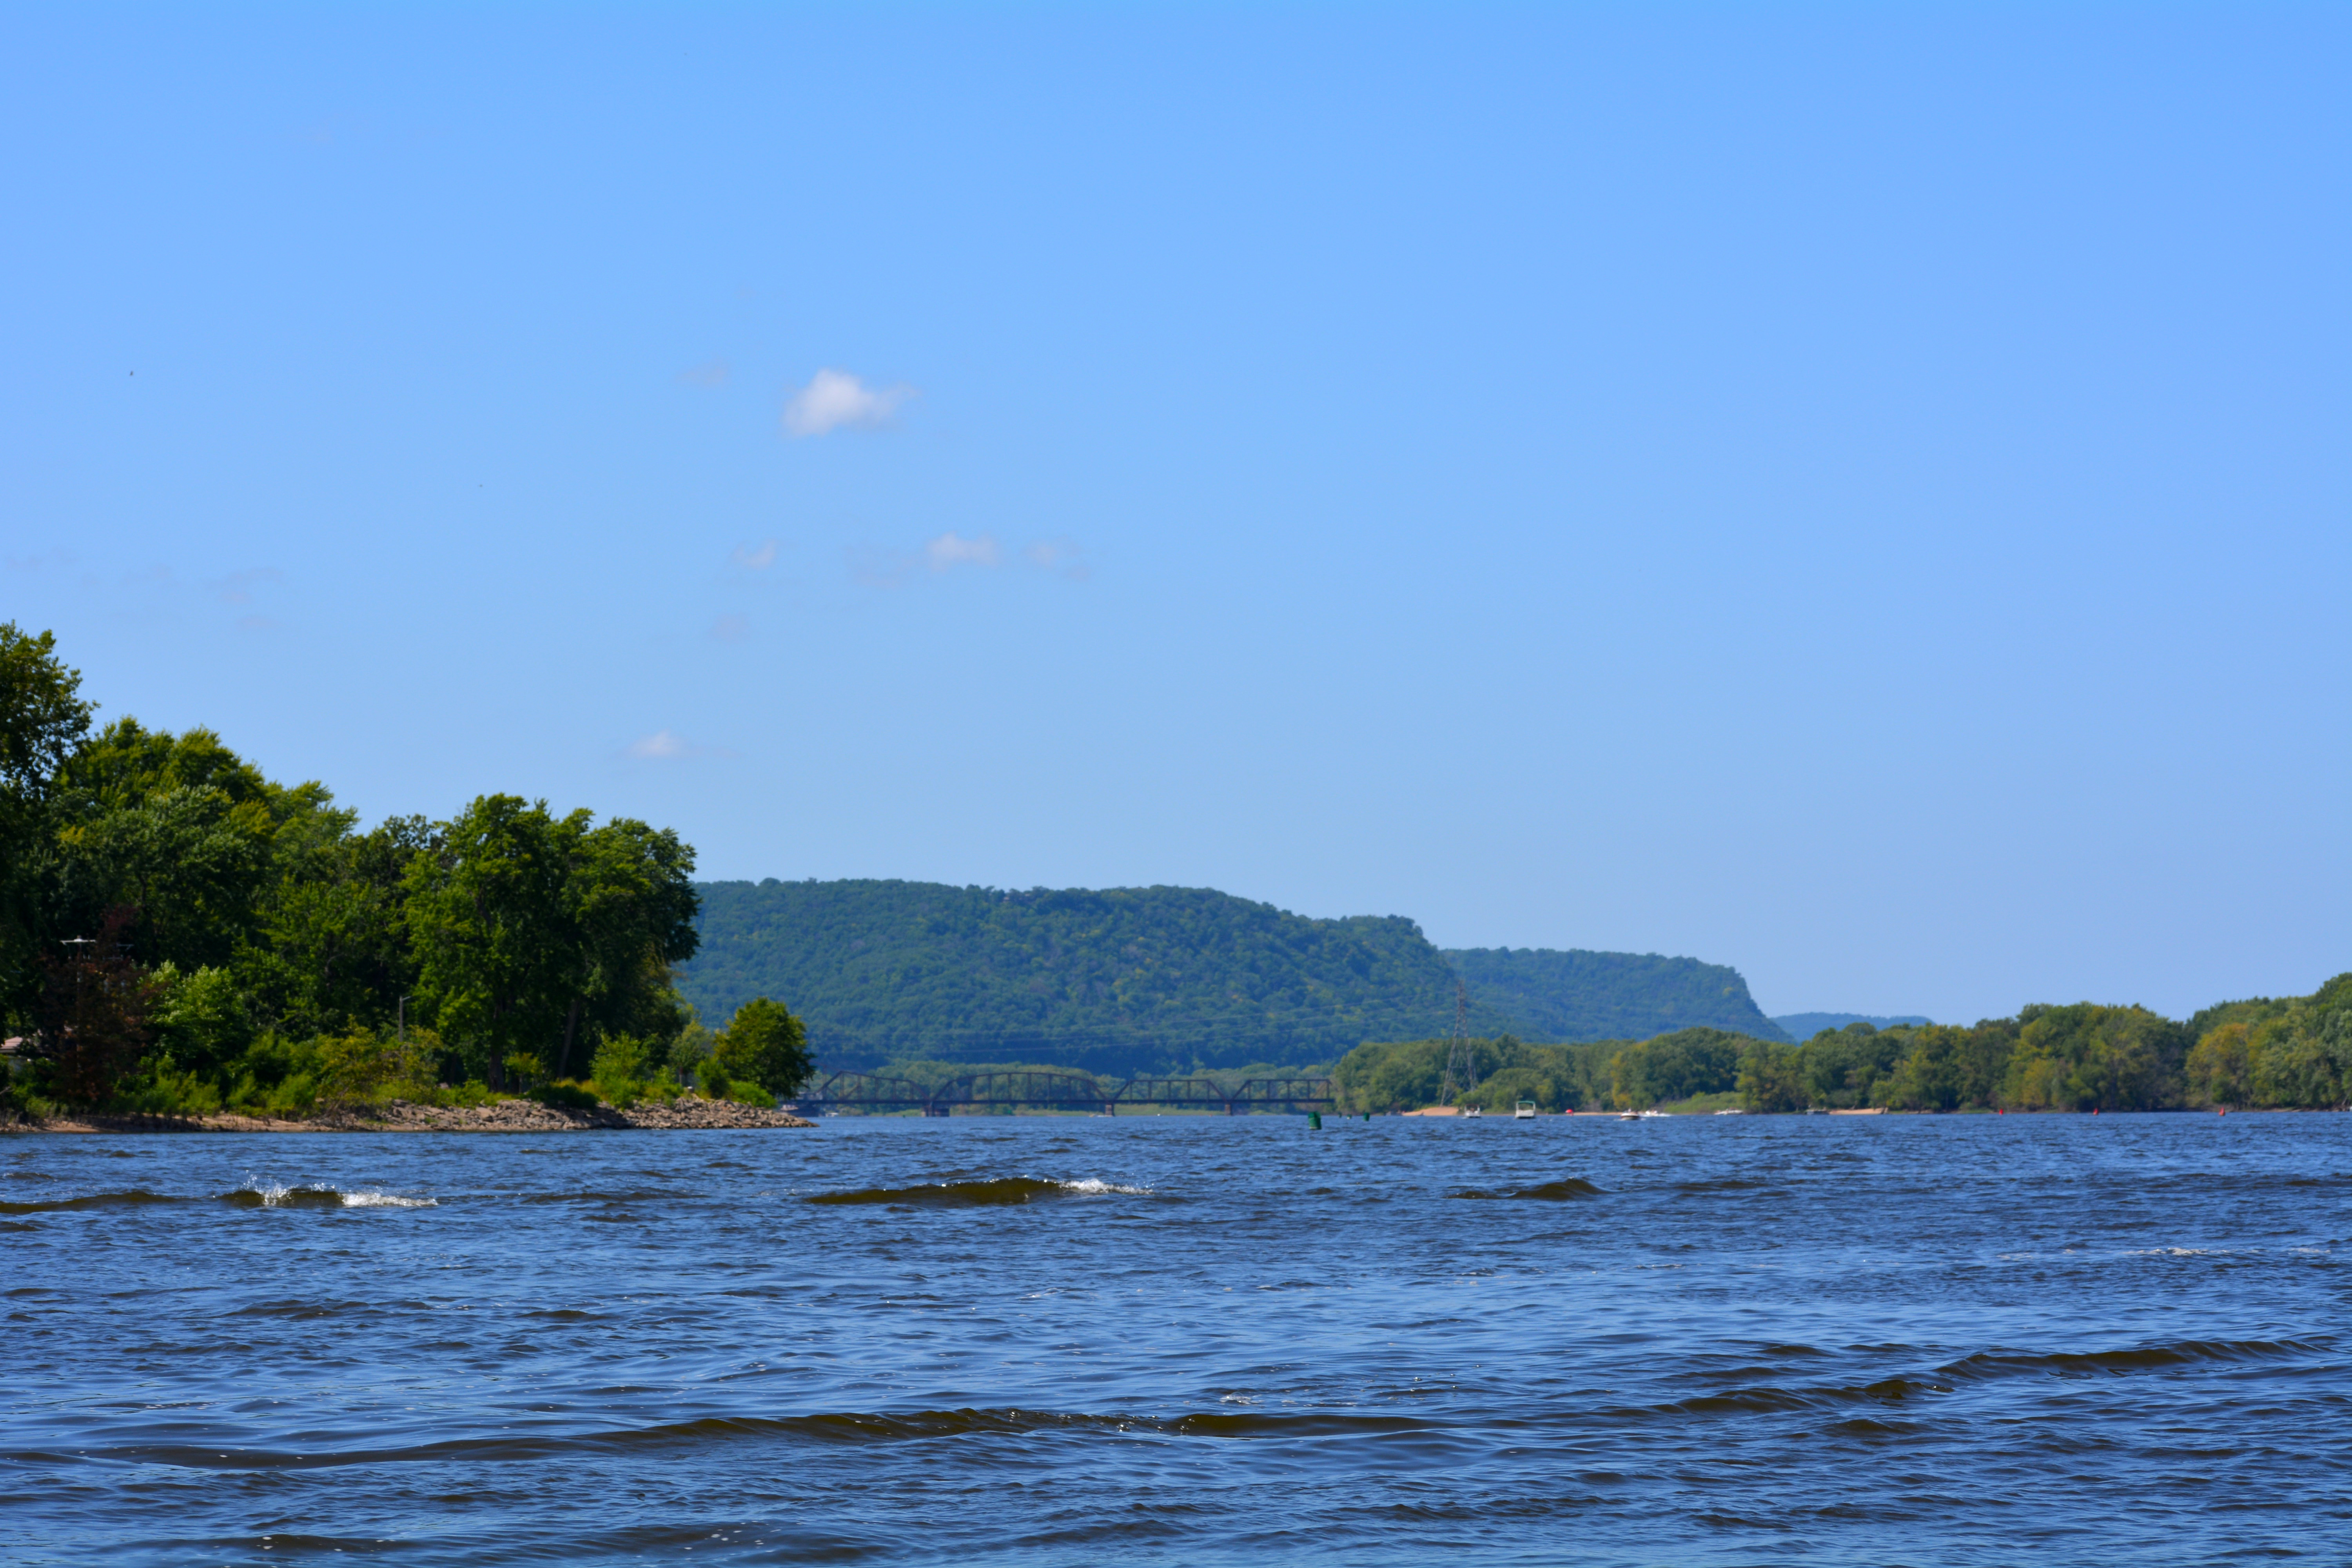 The view of bluffs in the distance shot from the river